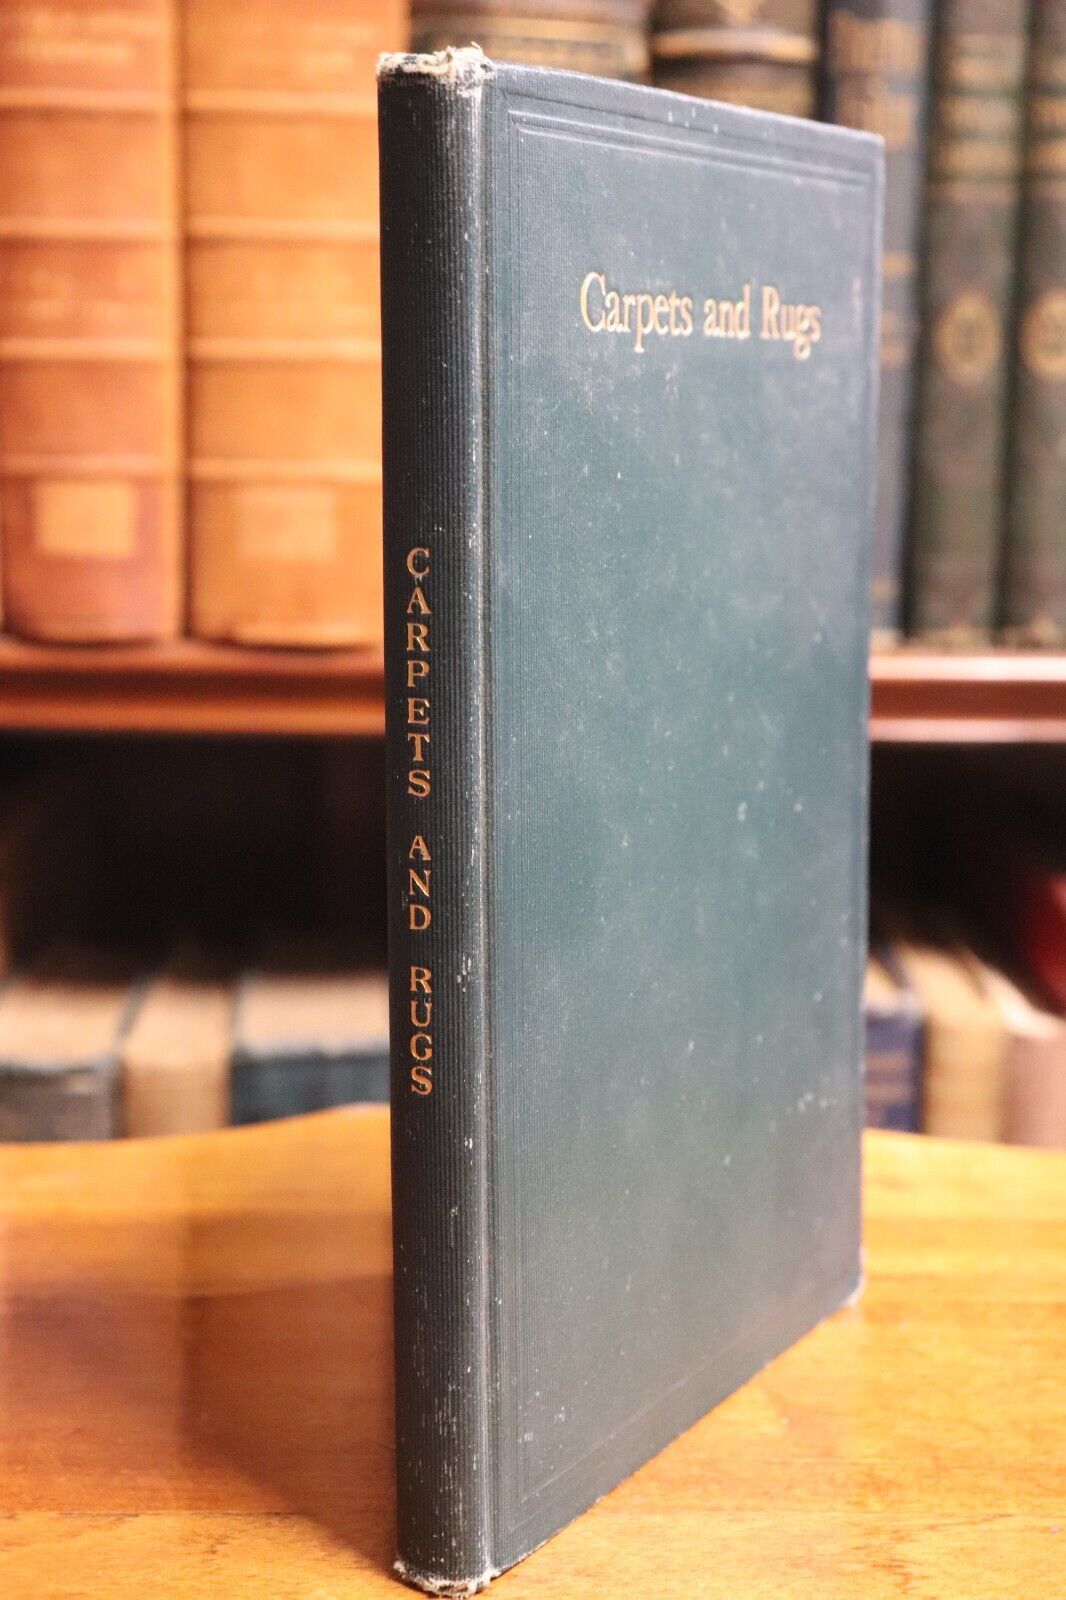 Carpets & Rugs by OA Kenyon - 1923 - First Edition History Book - 0